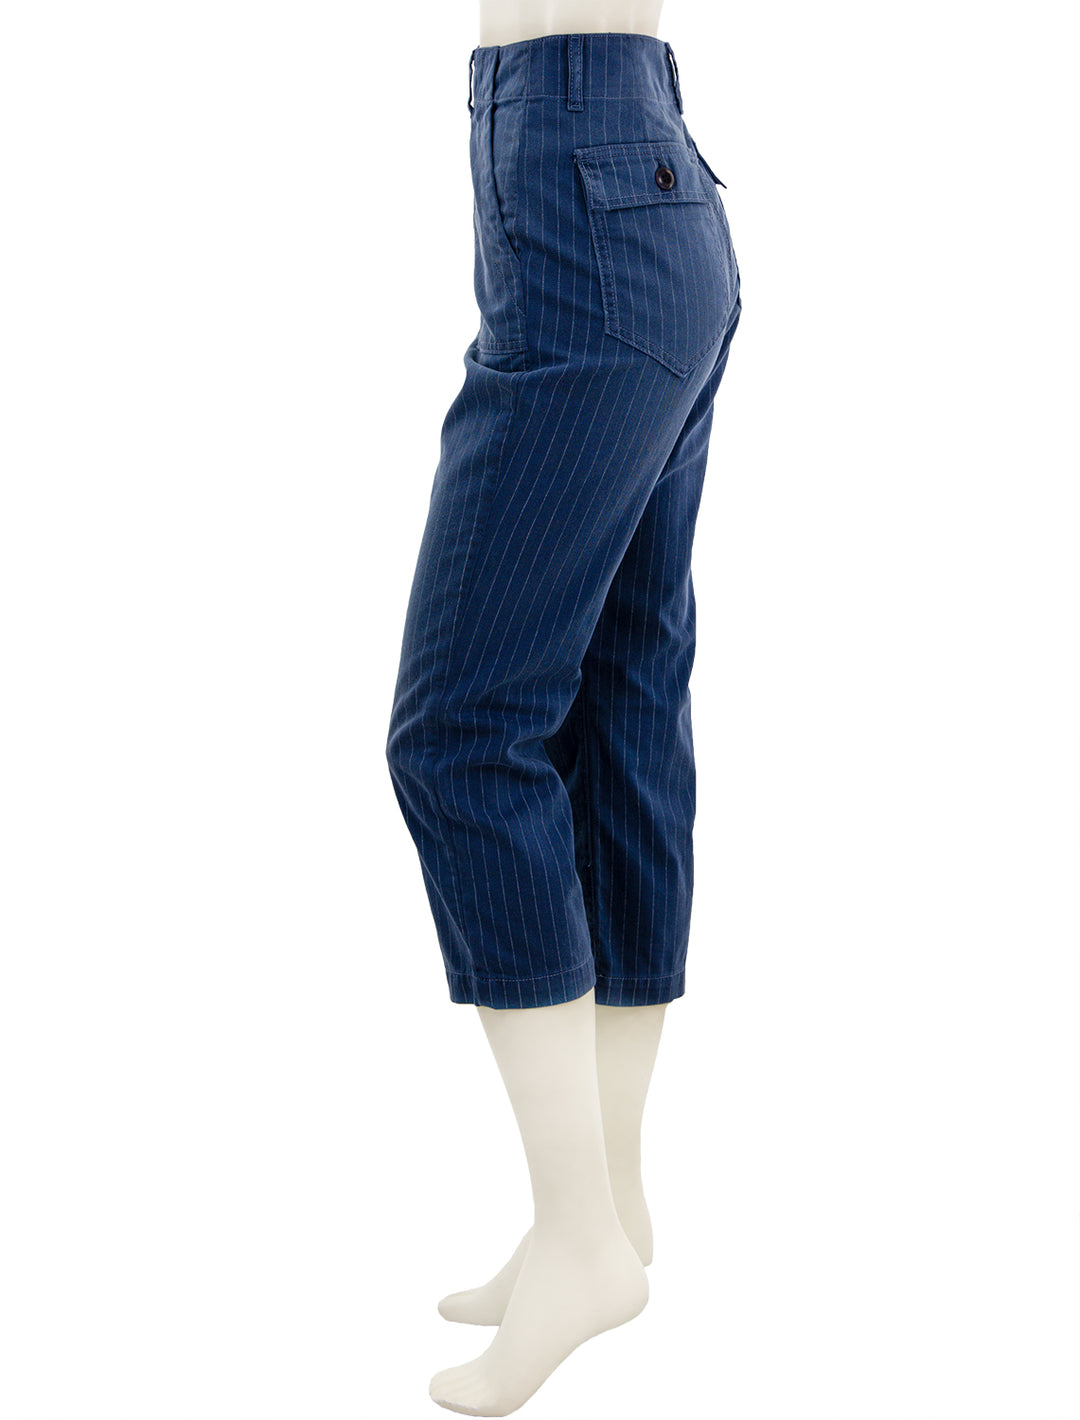 Side view of The Great's the ranger pant in dark indigo pin stripe.